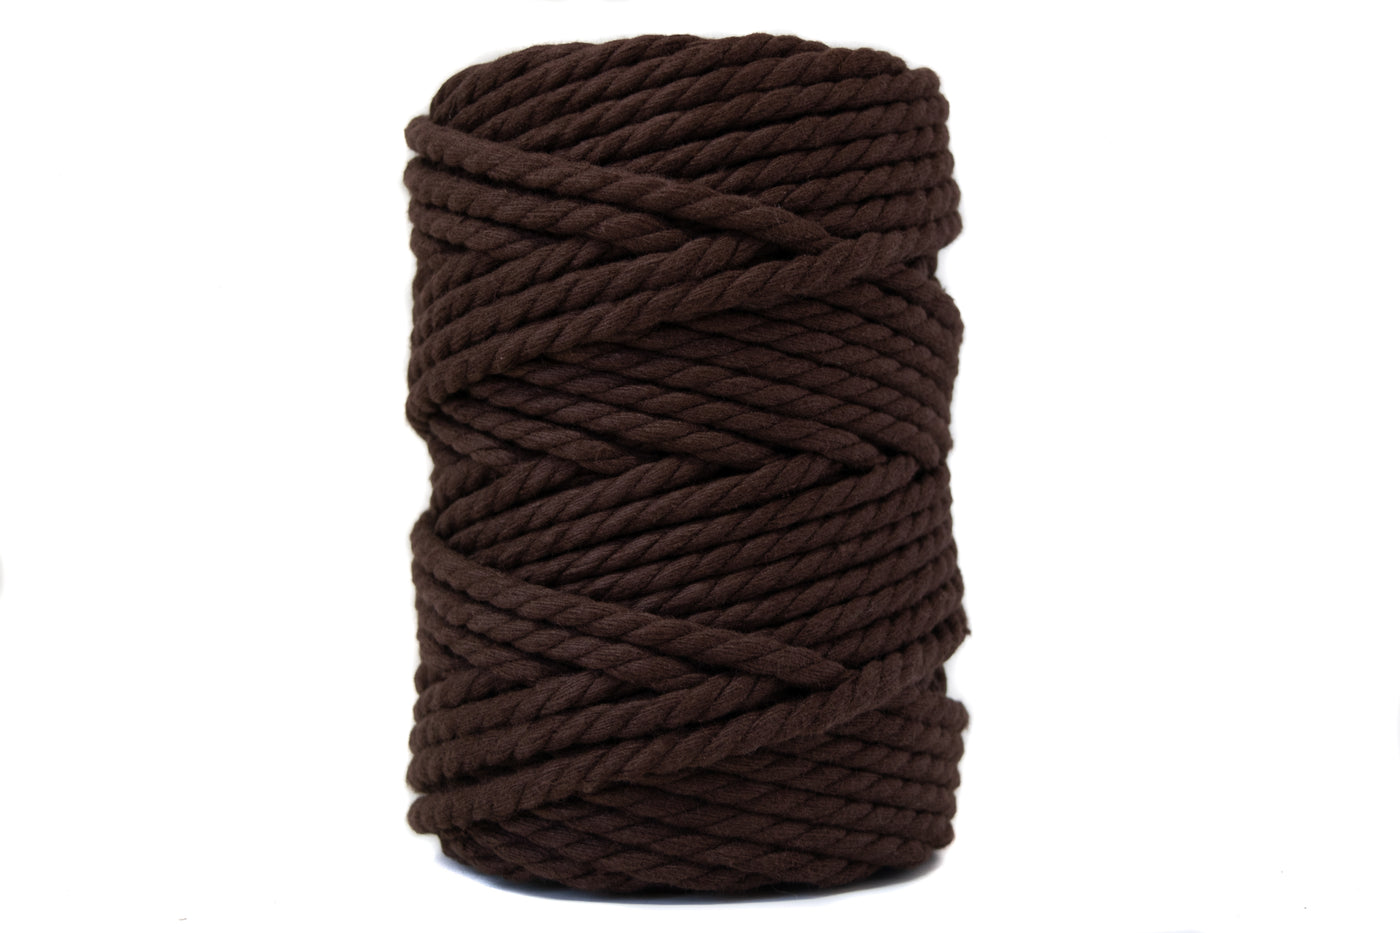 COTTON ROPE ZERO WASTE 5 MM - 3 PLY - CHOCOLATE COLOR